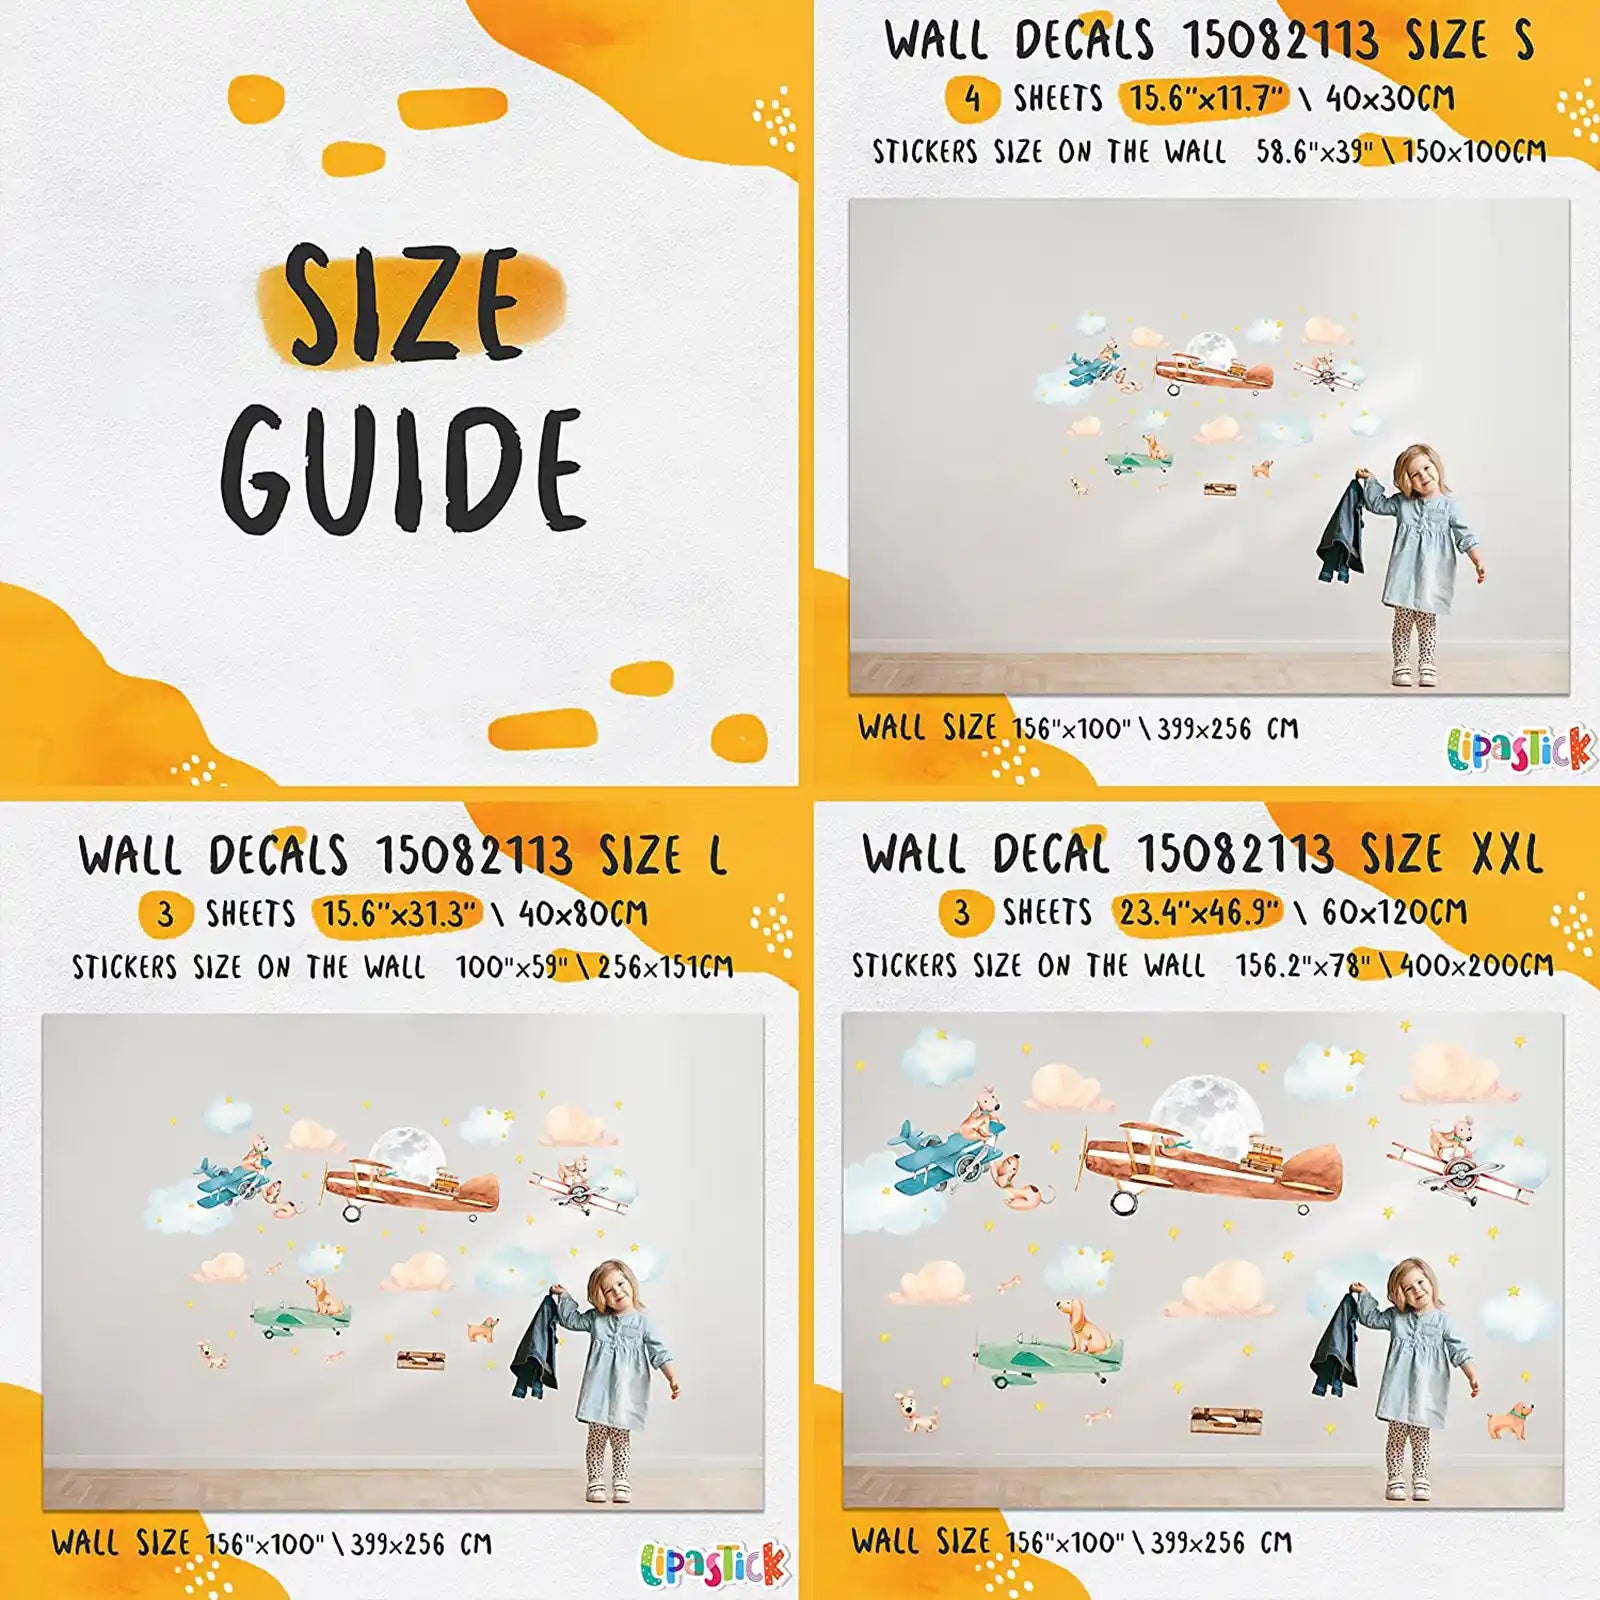 Large Airplane Wall Decals for Kids - Premium Kids Wall Stickers Aircrafts - Creative Nursery Wall Decal for children's room, bedrooms - Plane Baby Nursery Wall Decor - Large Vinyl Wall Decal